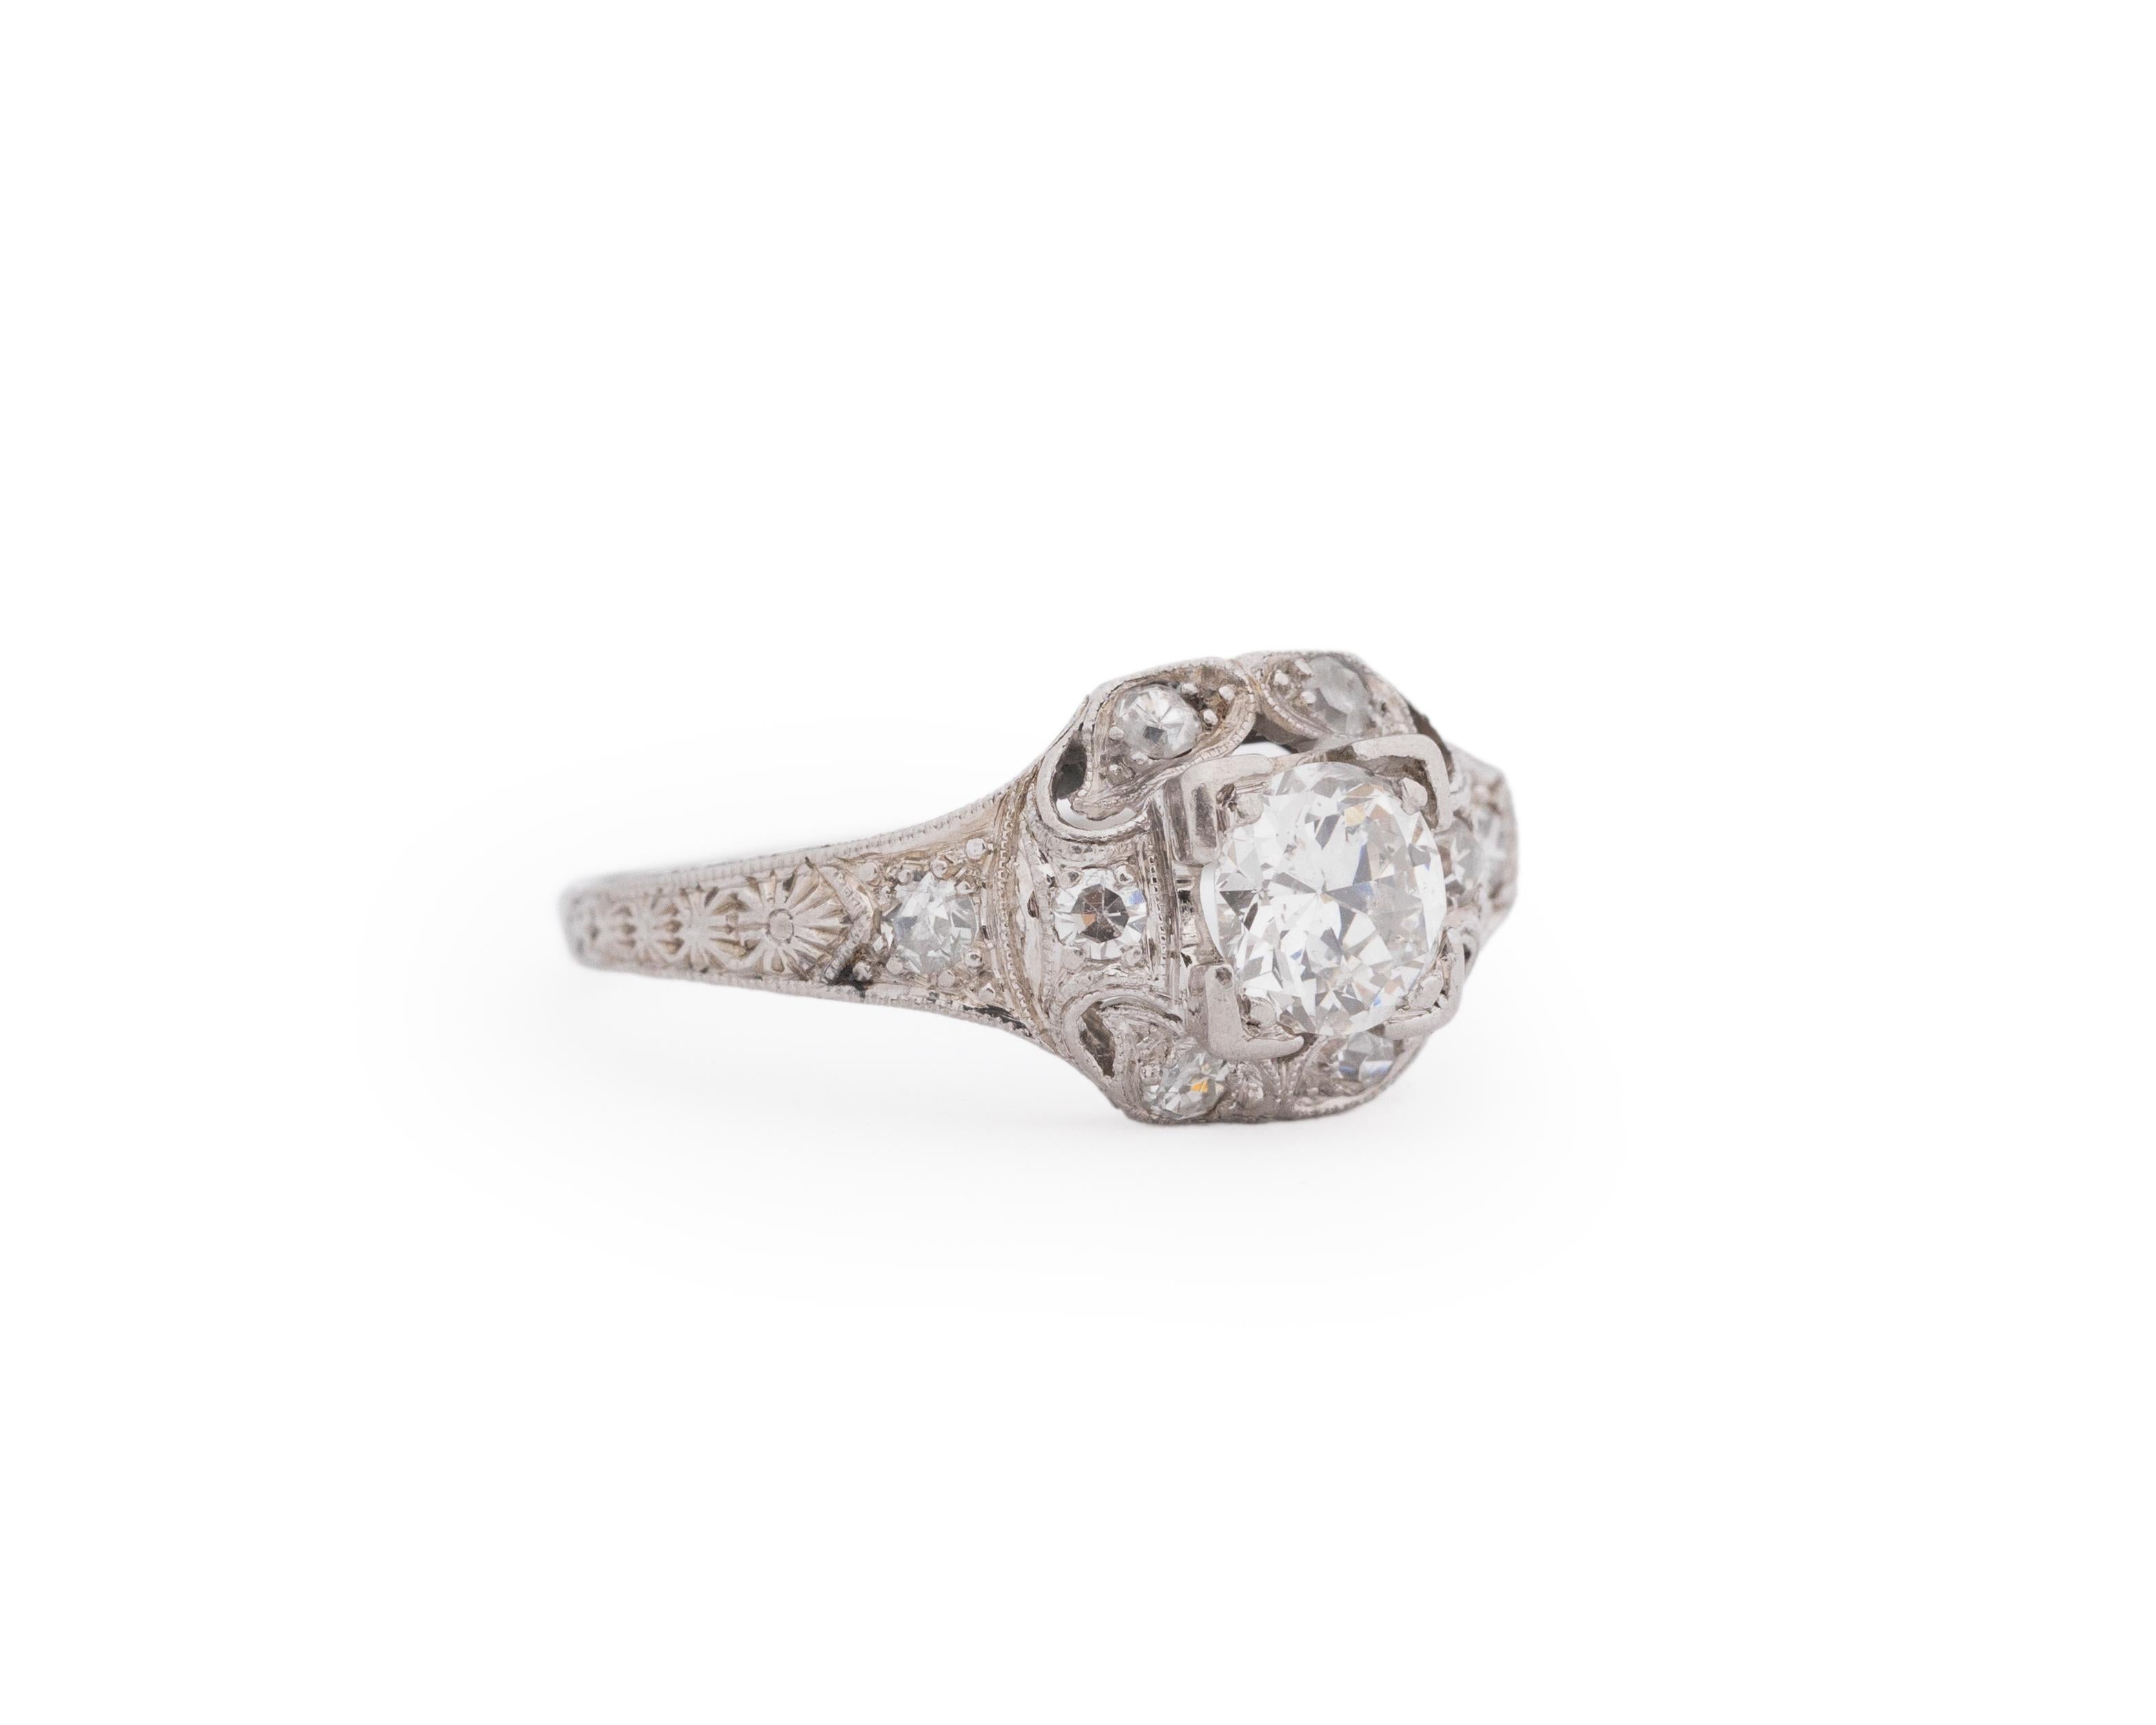 Year: 1920s

Item Details:
Ring Size: 5.75
Metal Type: Platinum [Hallmarked, and Tested]
Weight: 3.3. grams

Center Diamond Details:
Weight: .55ct total weight
Cut: Old European brilliant
Color: G
Clarity: VS
Type: Natural

Finger to Top of Stone